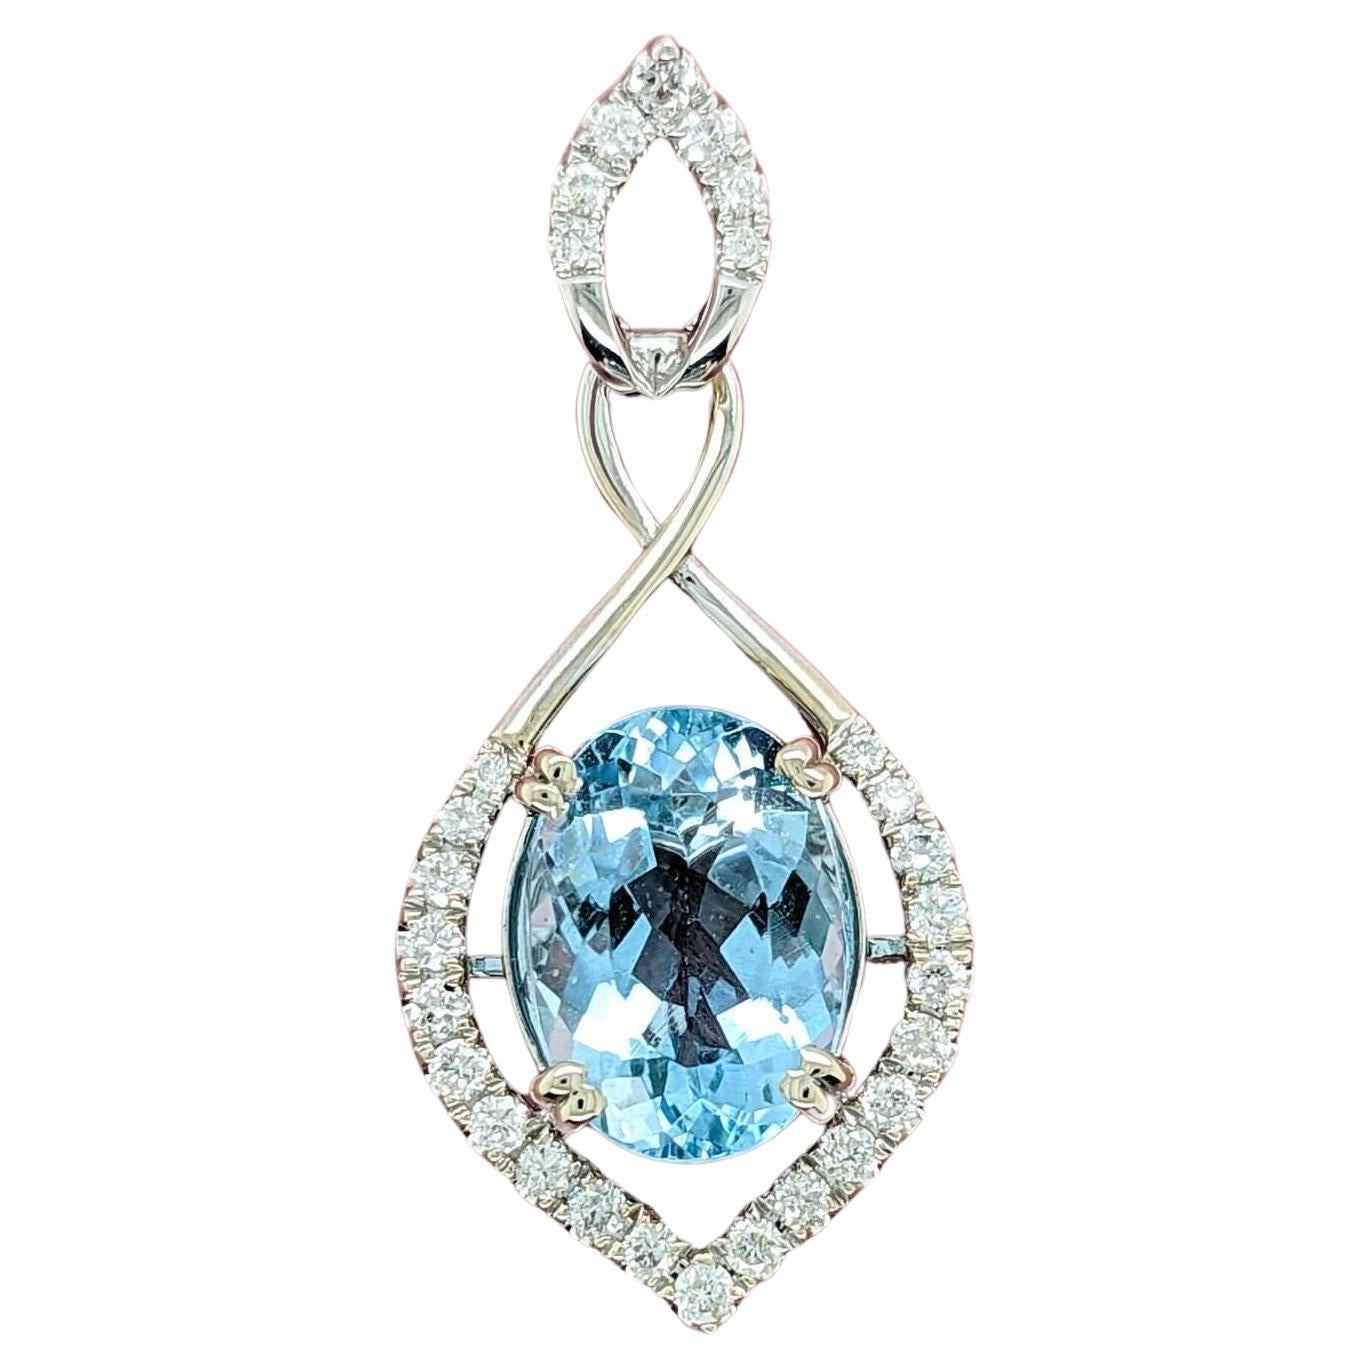 3ct Aquamarine Pendant w Natural Diamonds in Solid 14K White Gold Oval 11x9mm